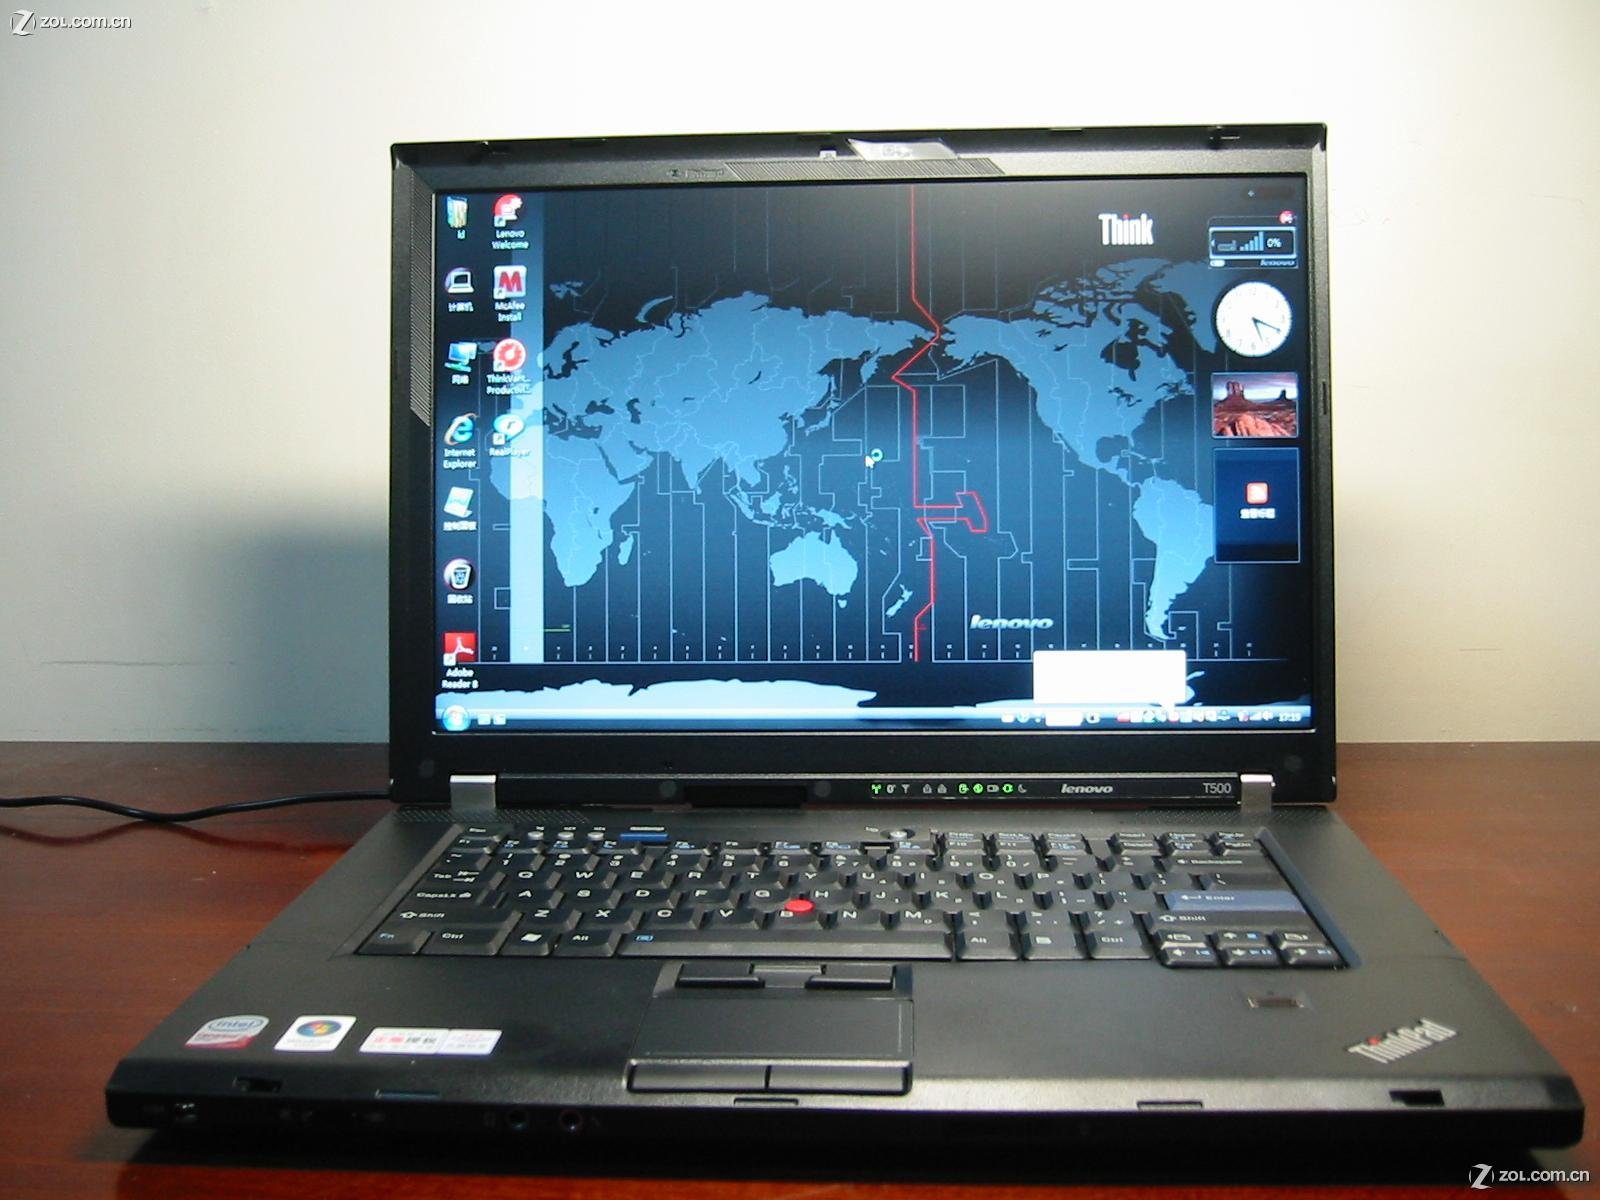 More information about "Lenovo thinkpad T500"